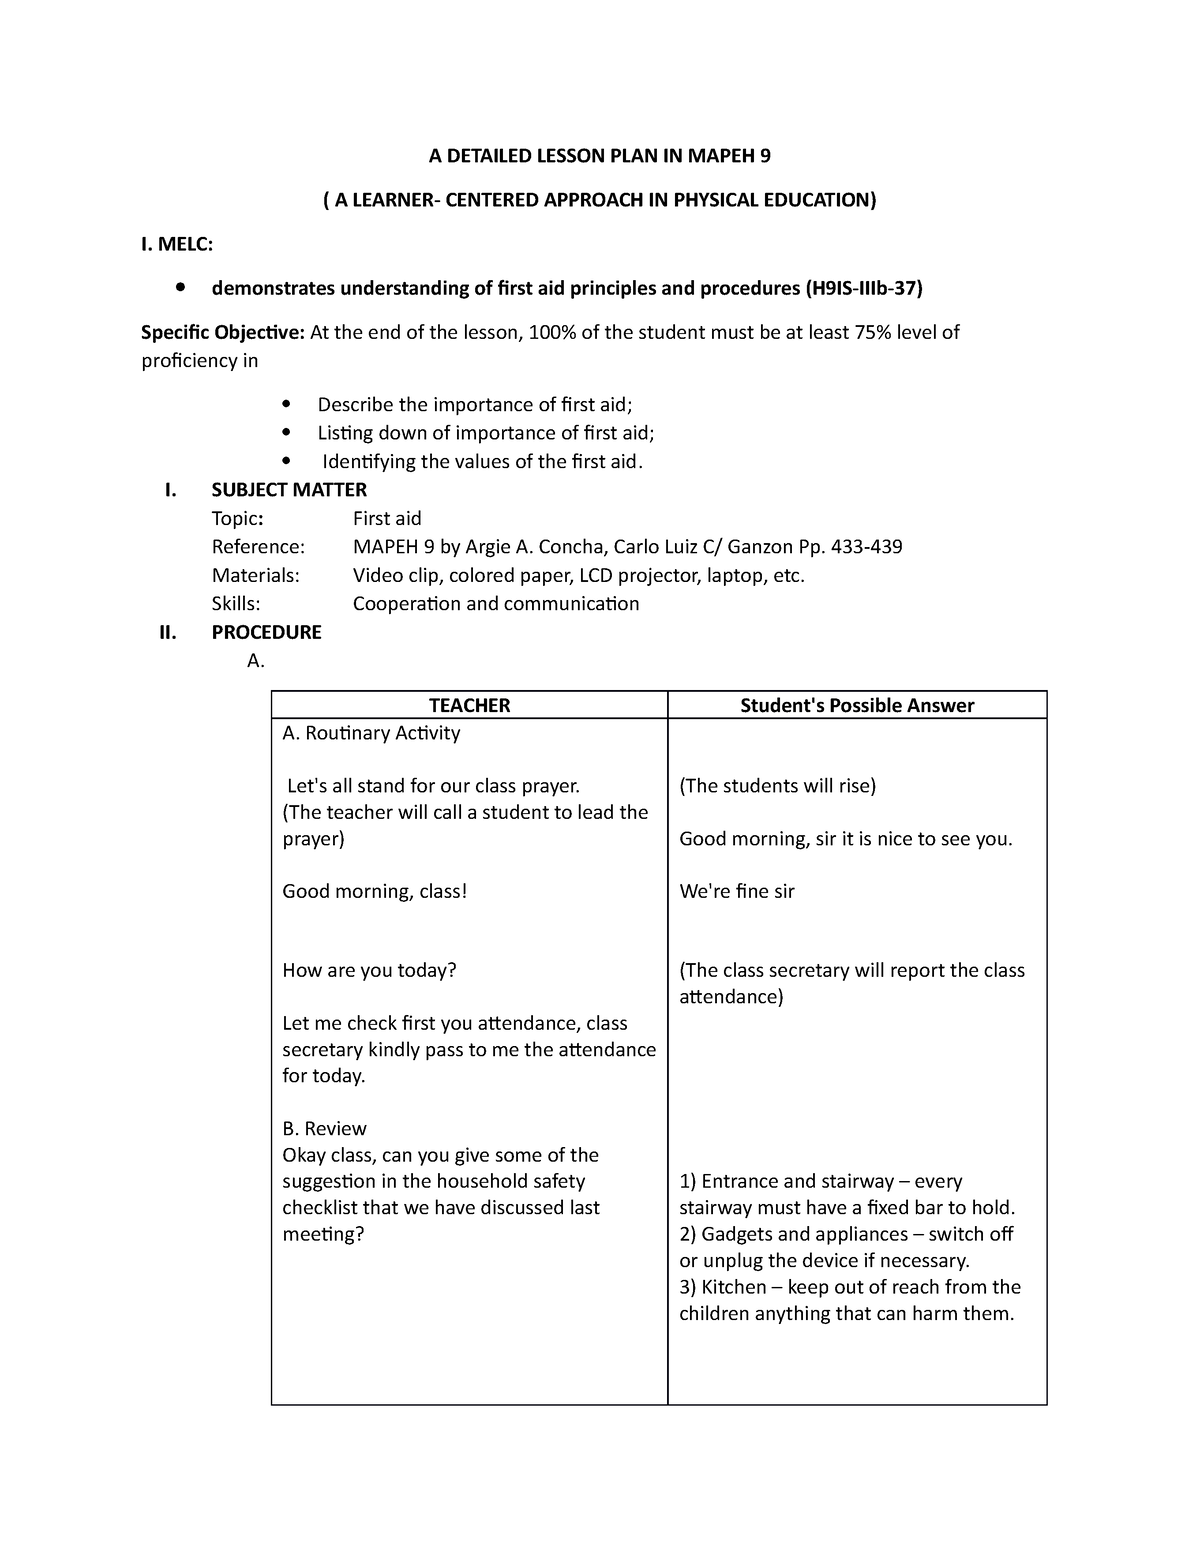 Lesson Plan 1 A Detailed Lesson Plan In Mapeh 9 A Learner Centered Approach In Physical 9763